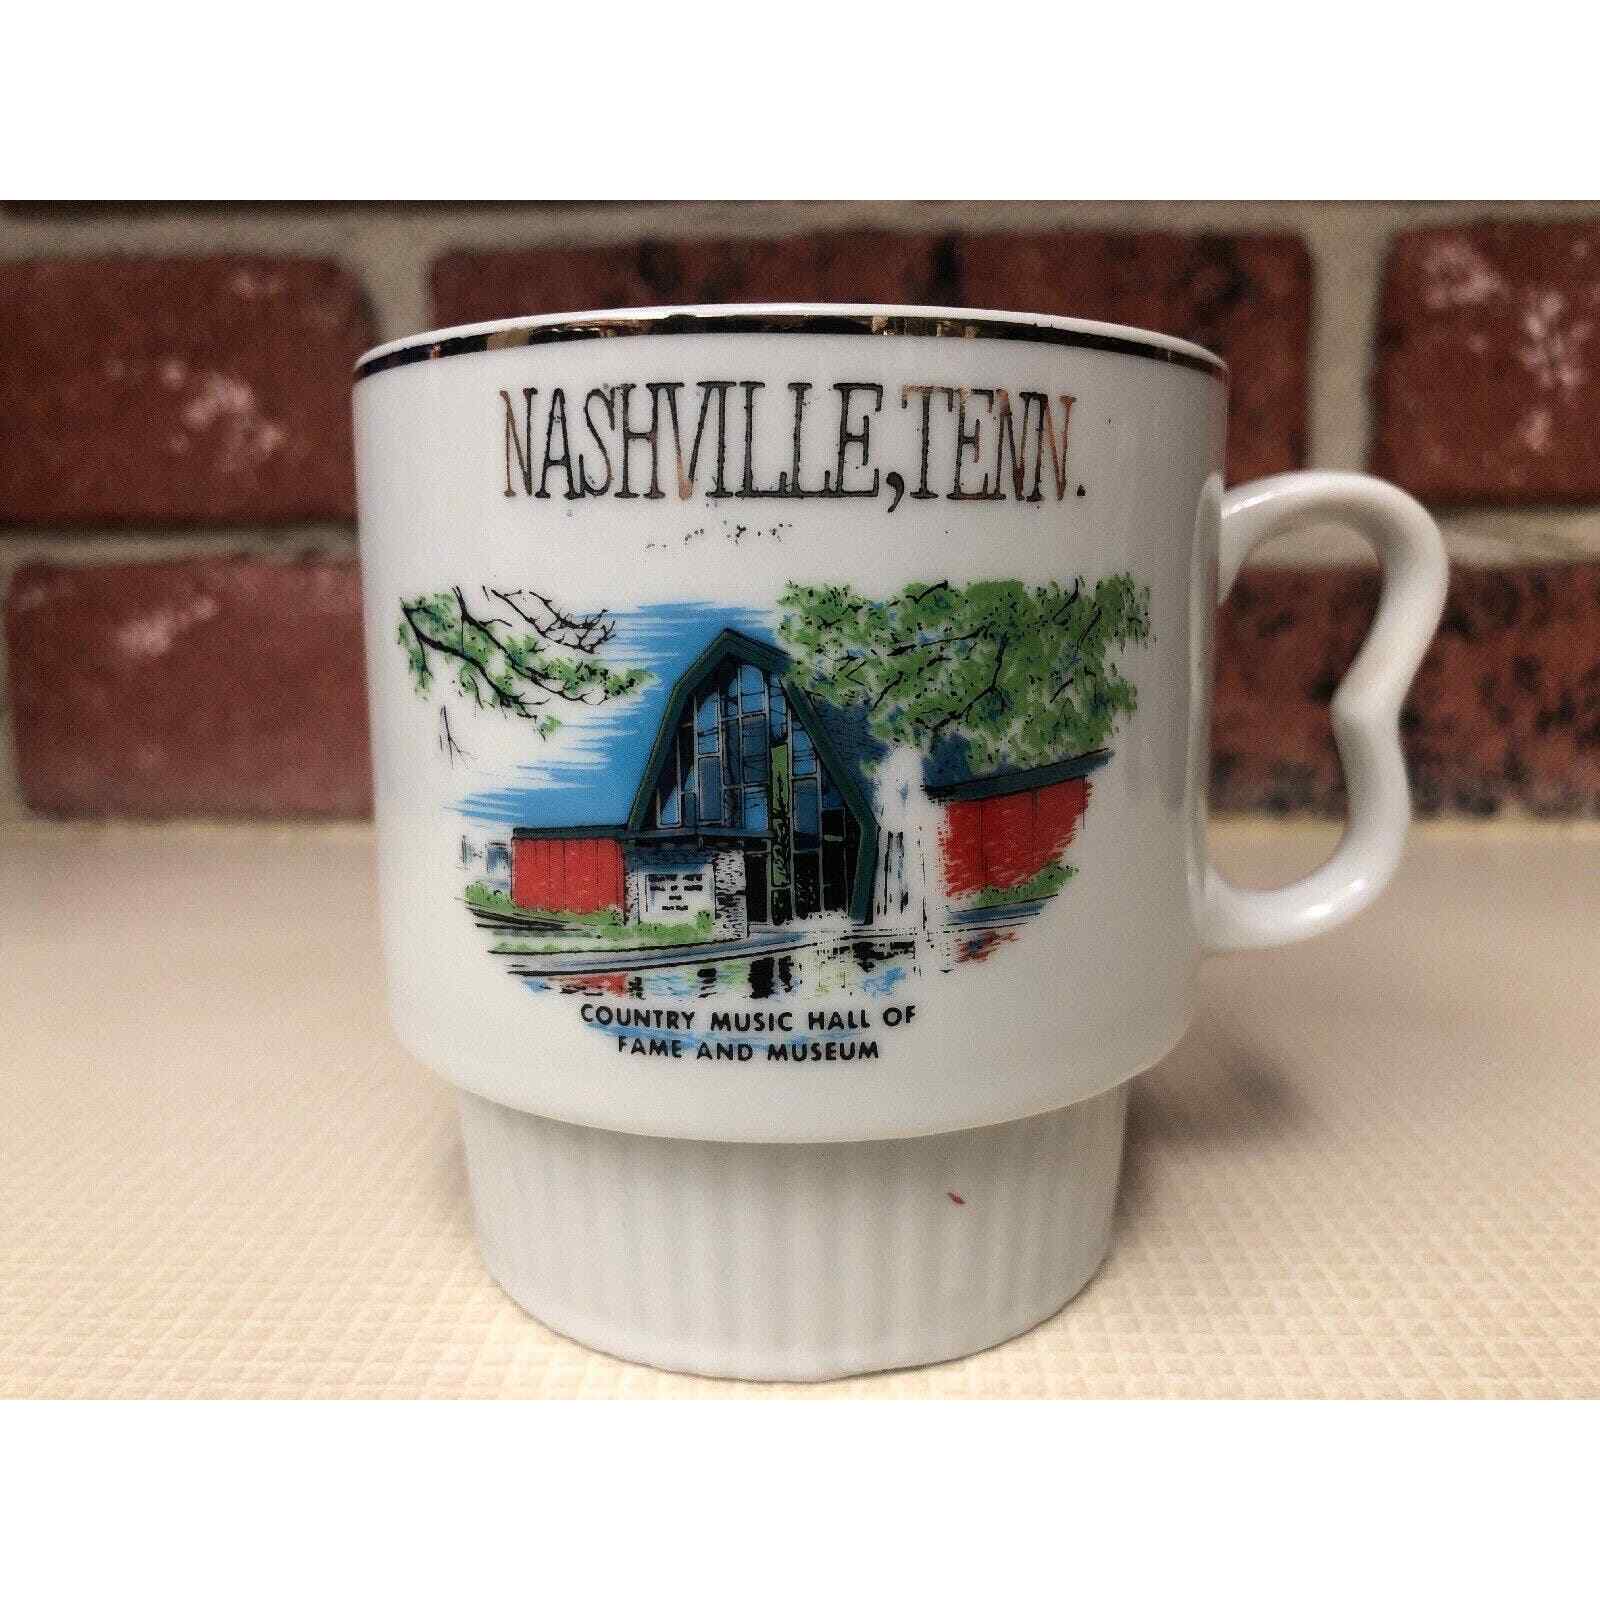 Nashville Tennessee Country Music Hall of Fame and Museum Coffee Mug Vintage Cup